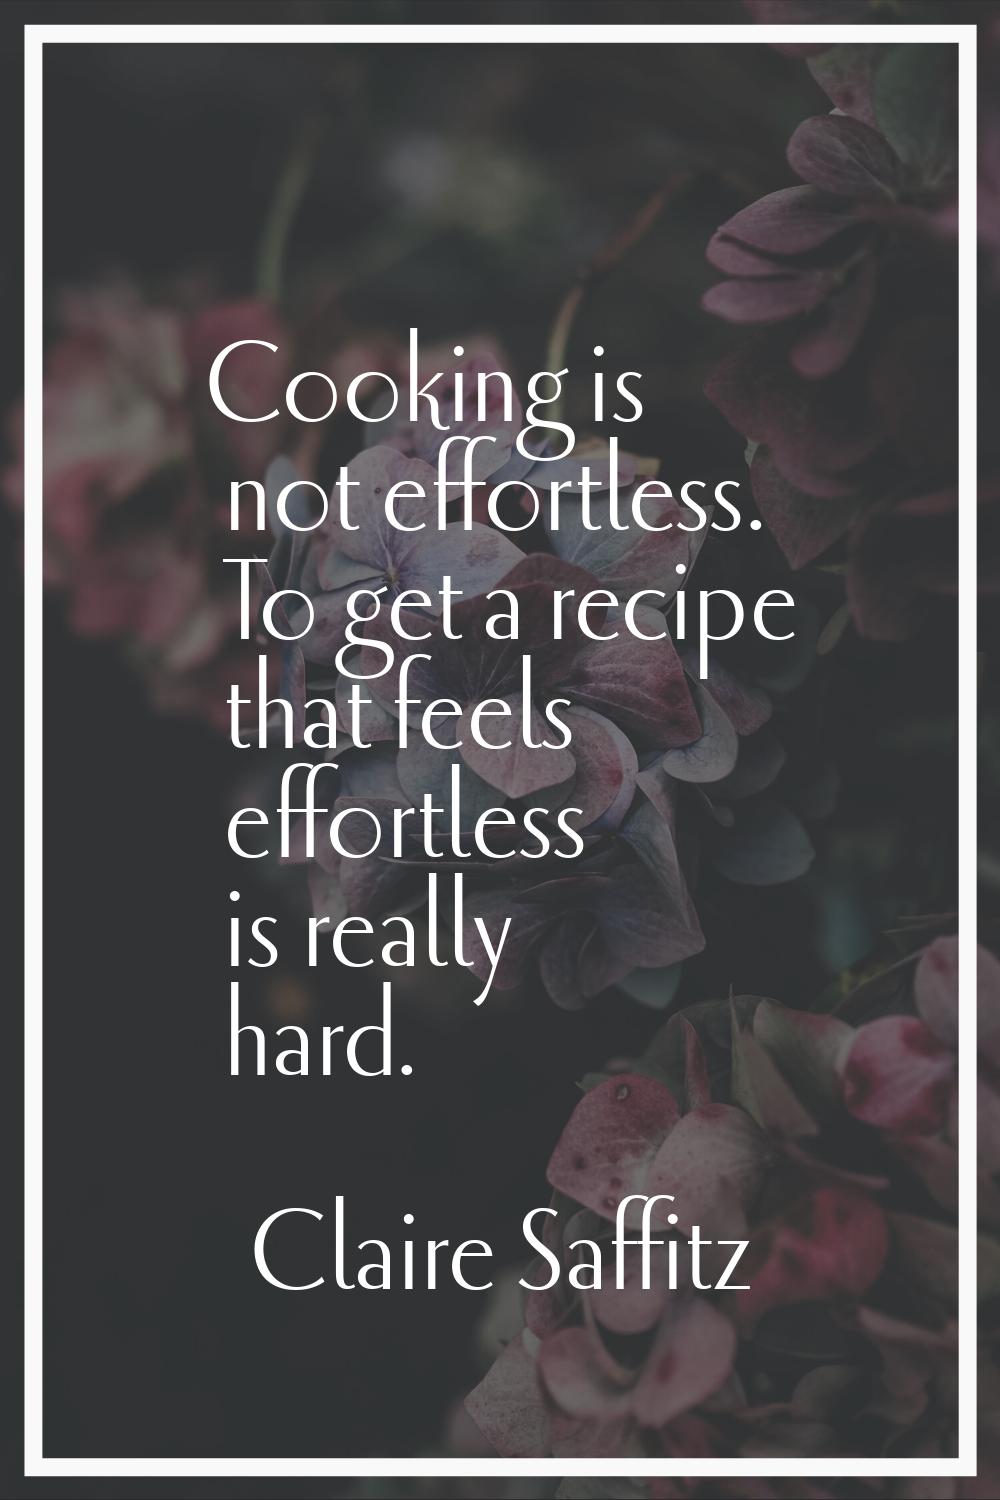 Cooking is not effortless. To get a recipe that feels effortless is really hard.